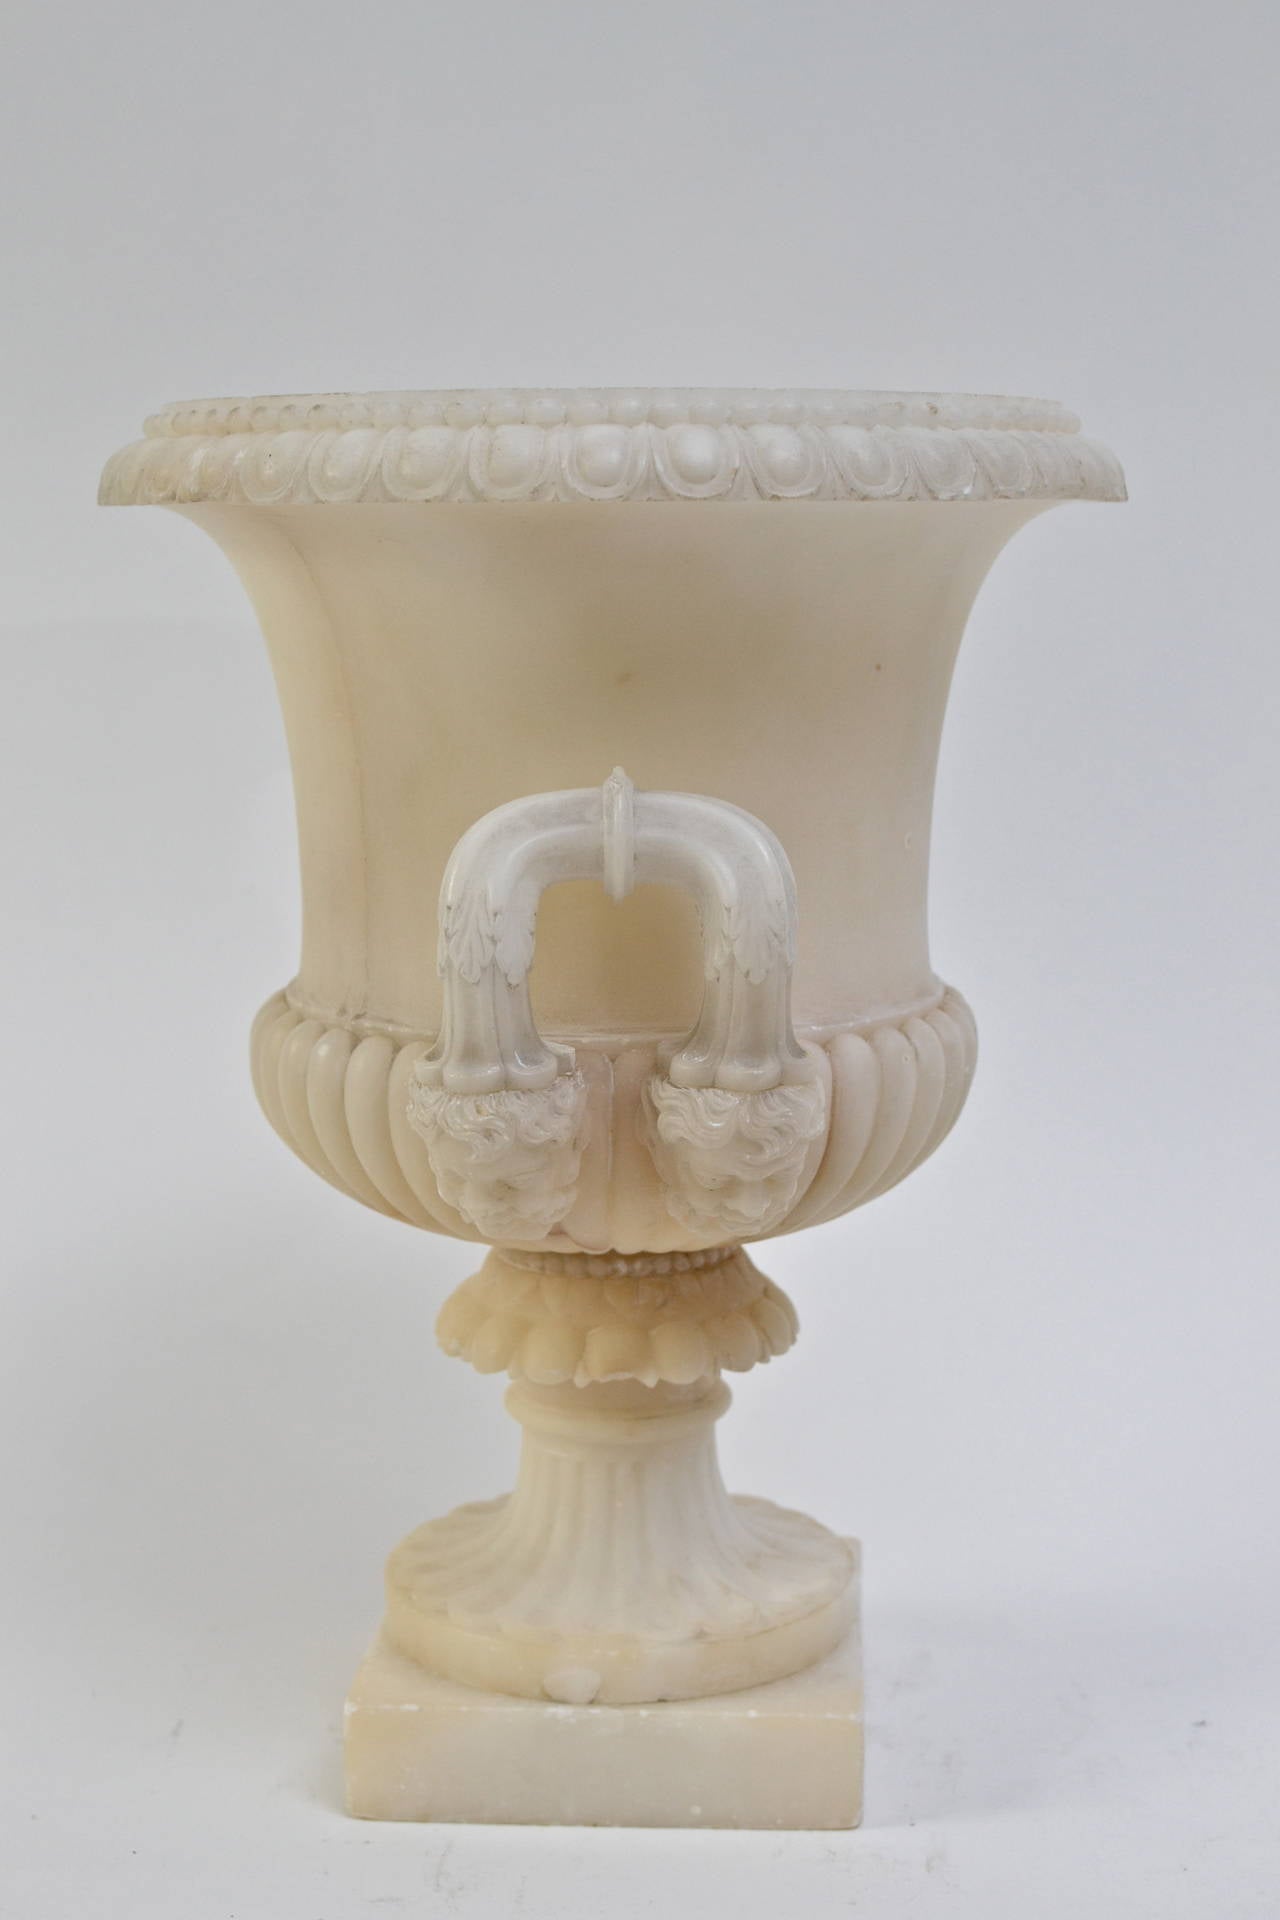 An empire Italian alabaster urn, first half of the19th century.